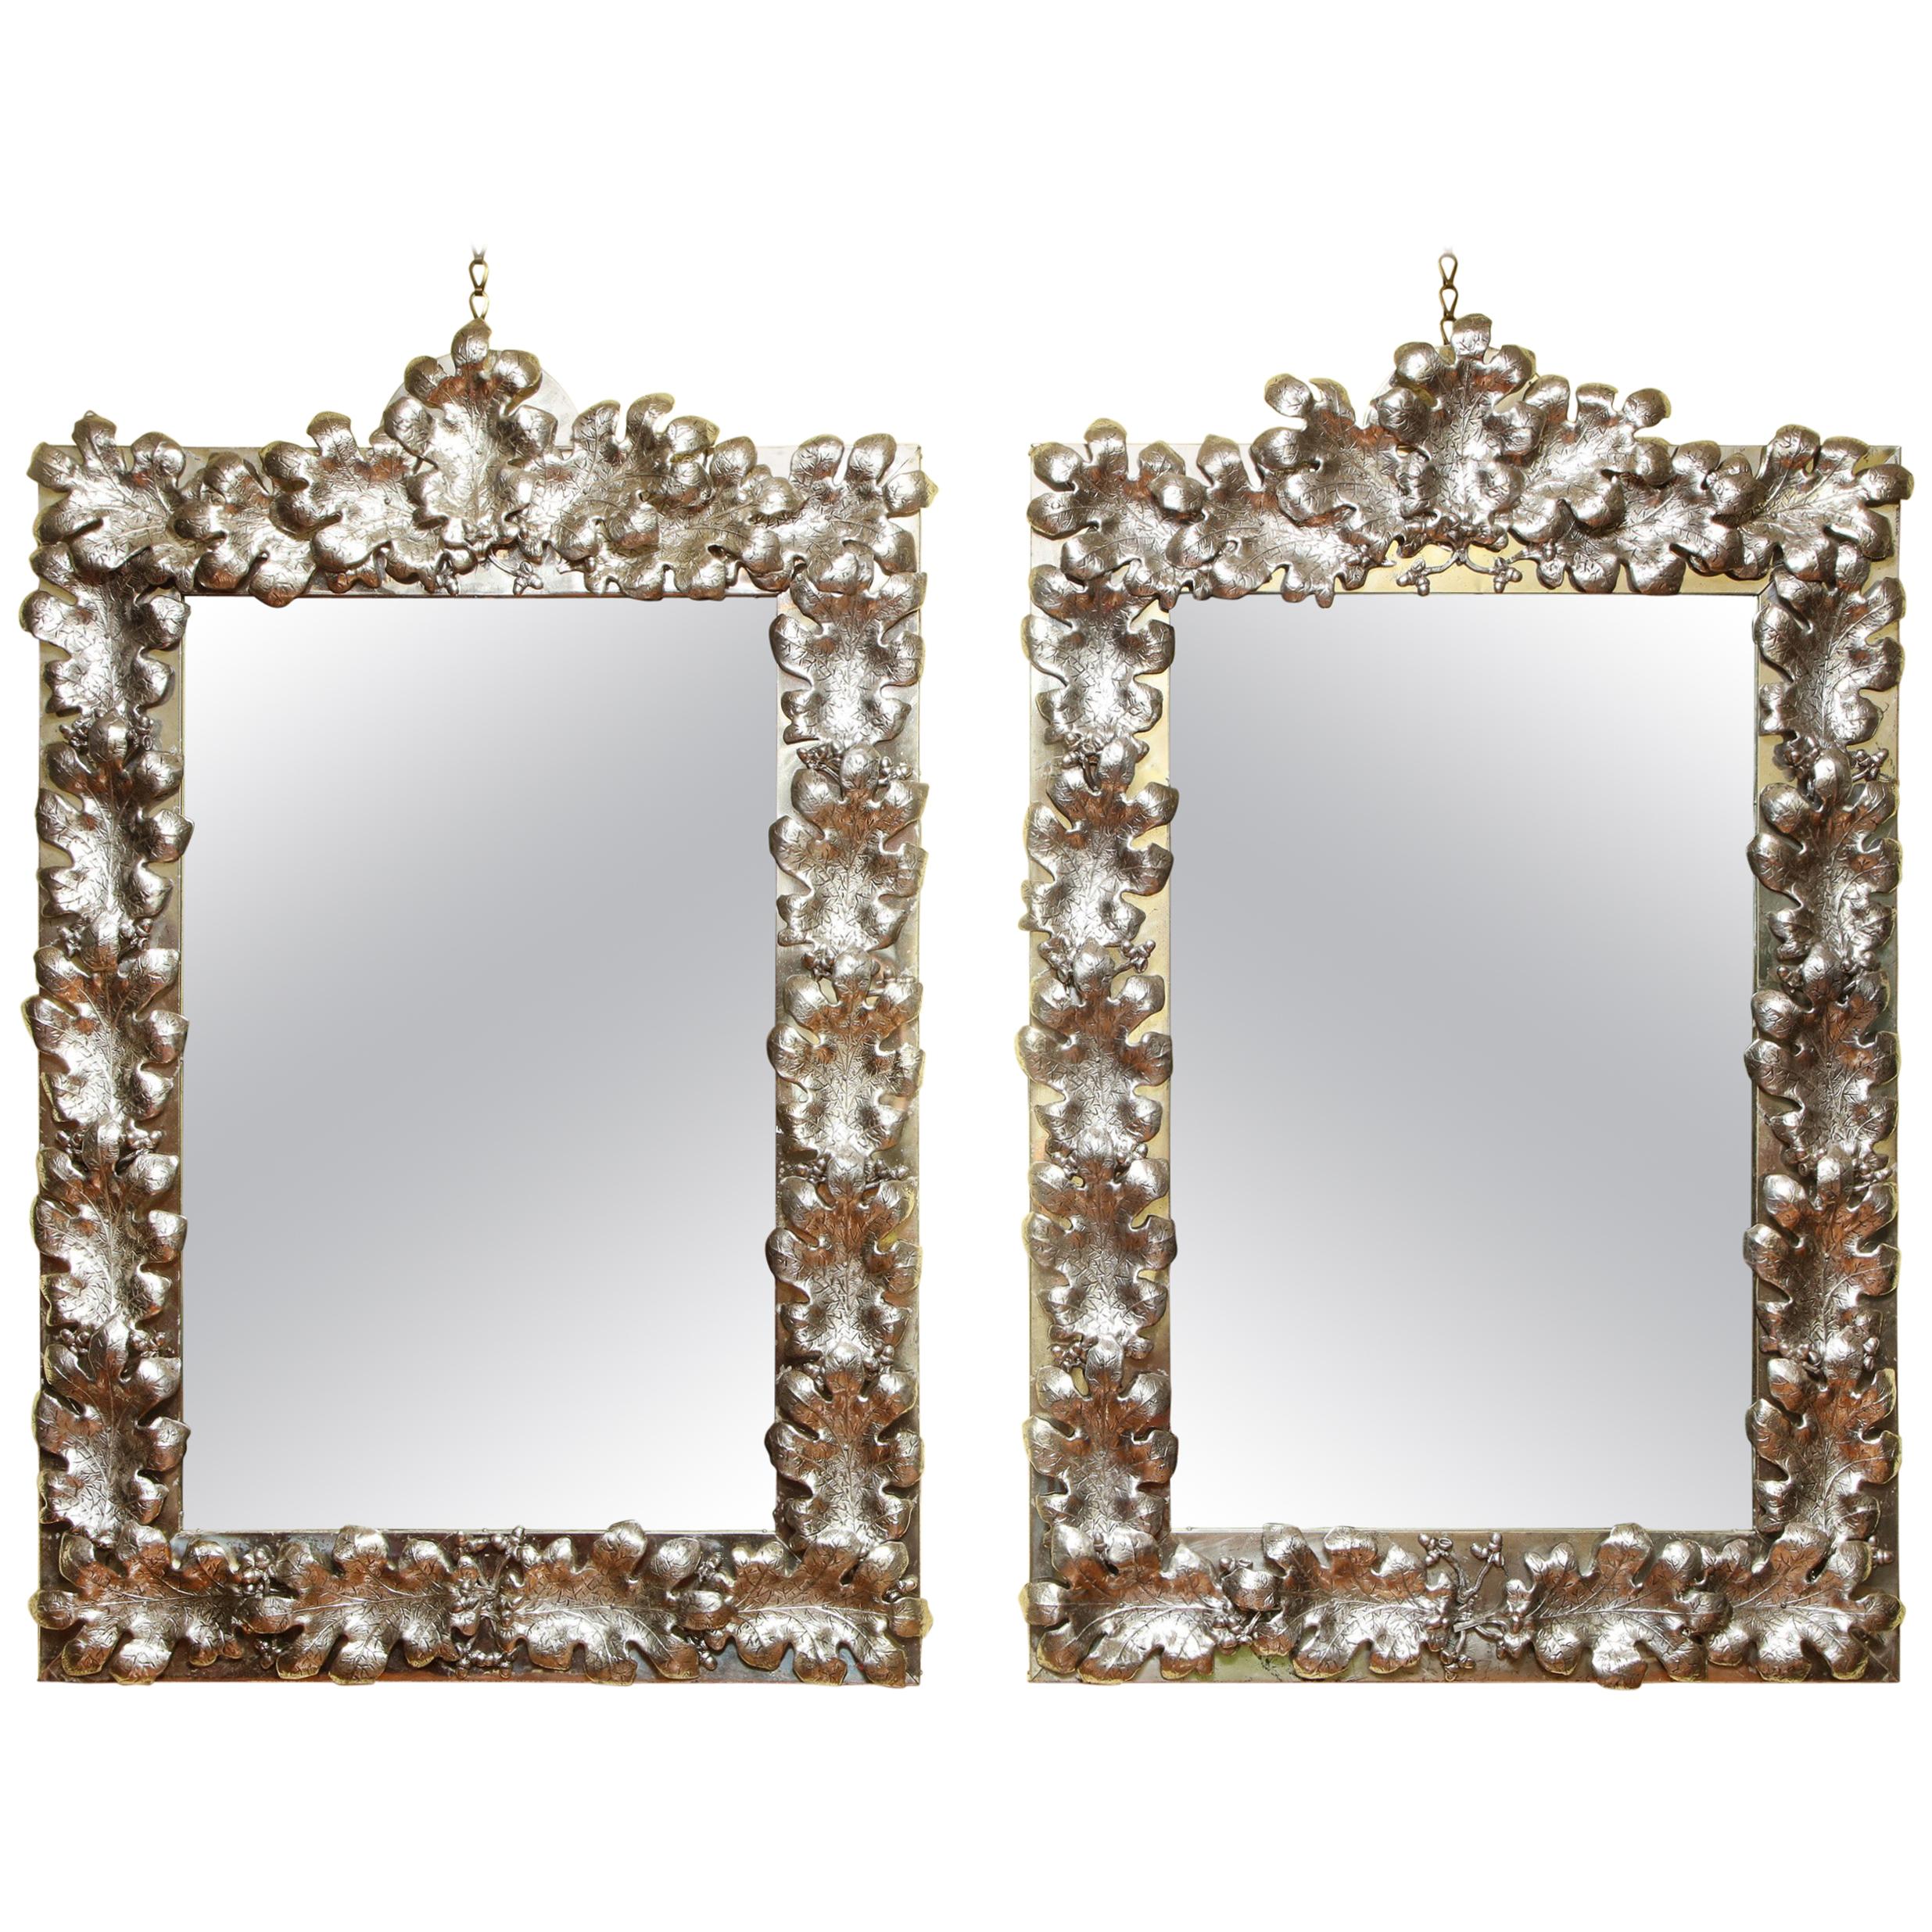 Large Pair of Mid-Century Modern Silvered Rectangular Mirrors, Mexico circa 1950 For Sale